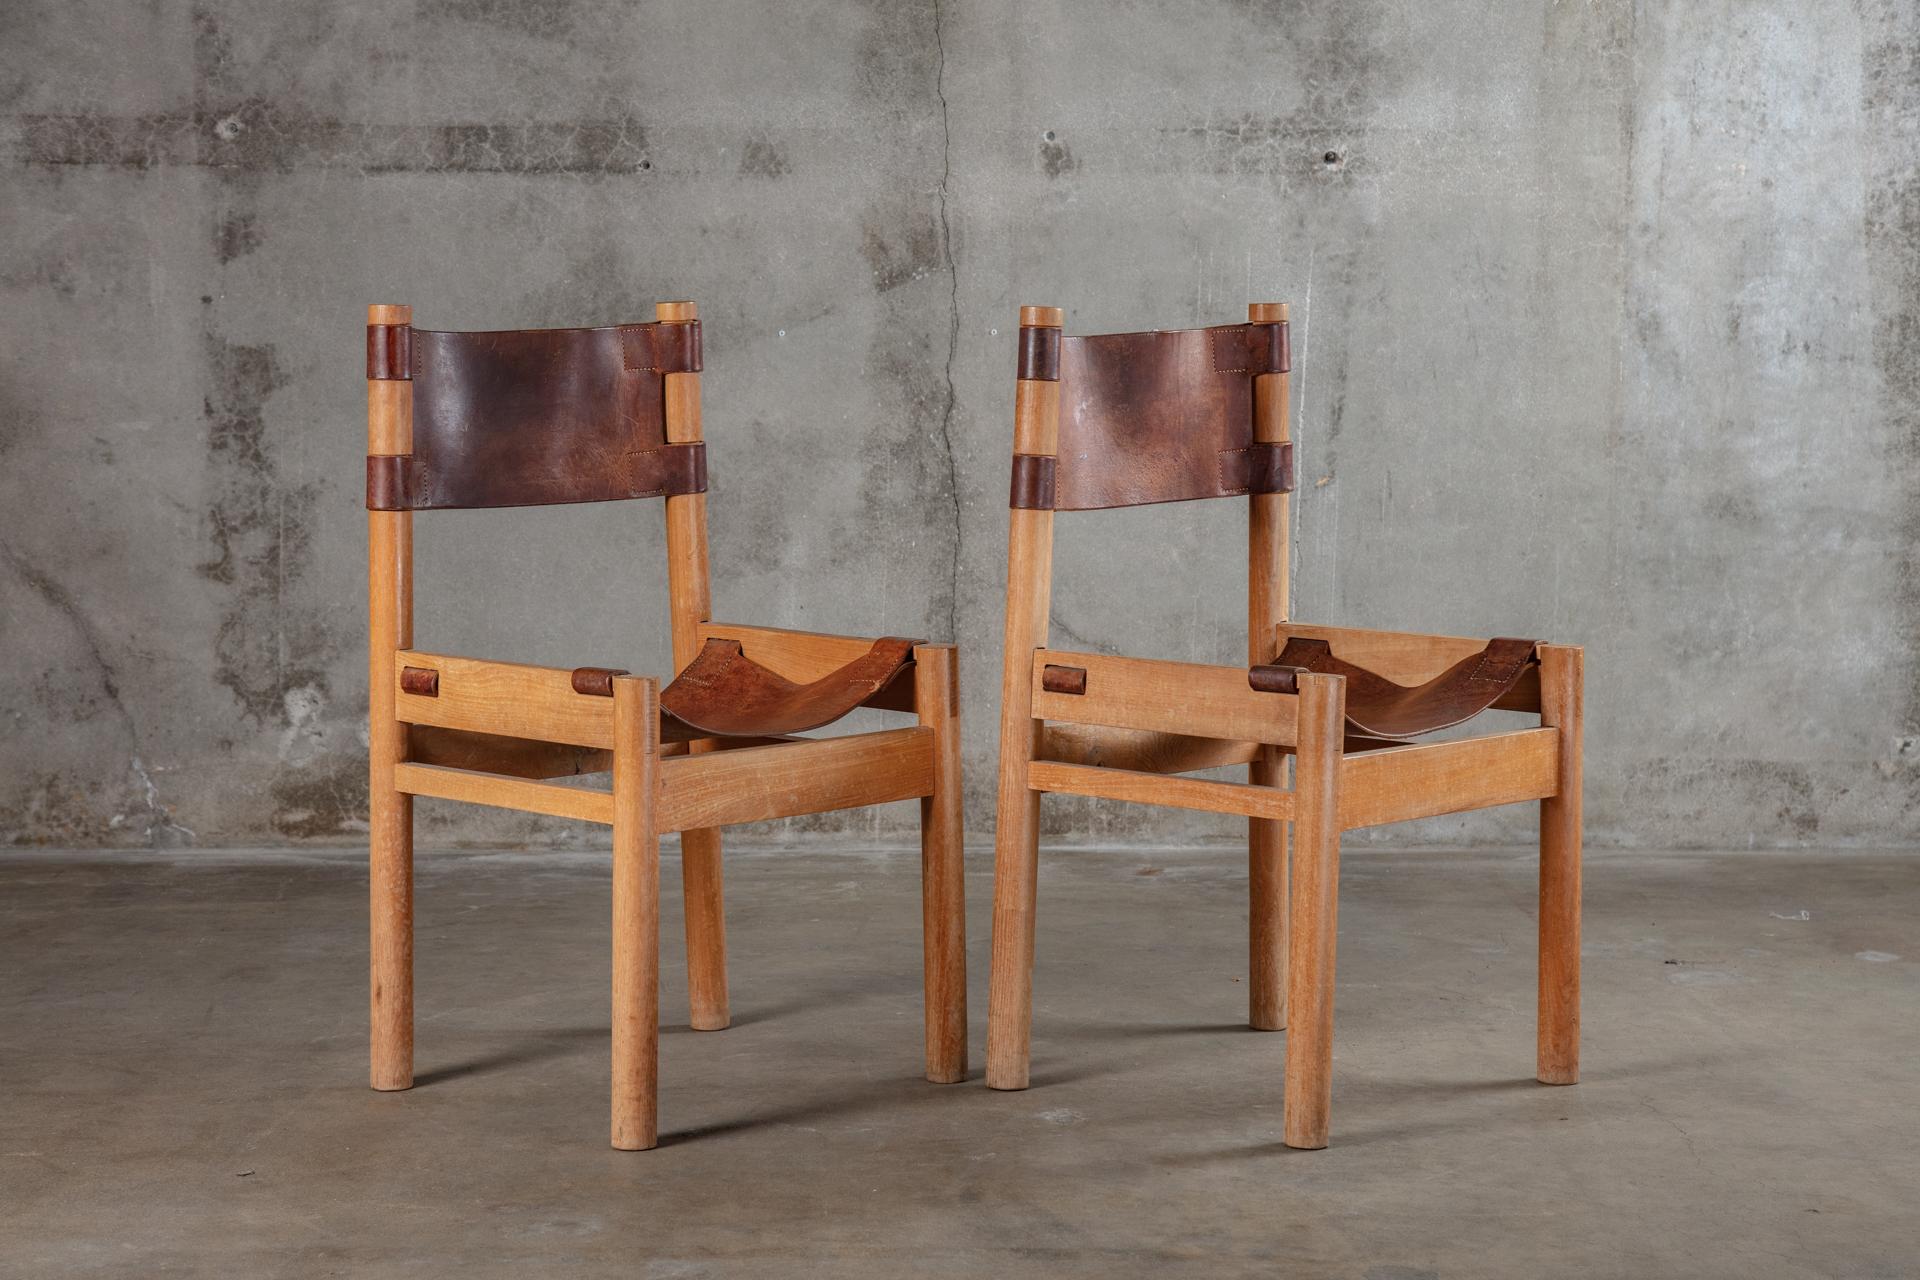 20th Century French Oak Chairs with Leather Sling Seats by Pierre Chapo